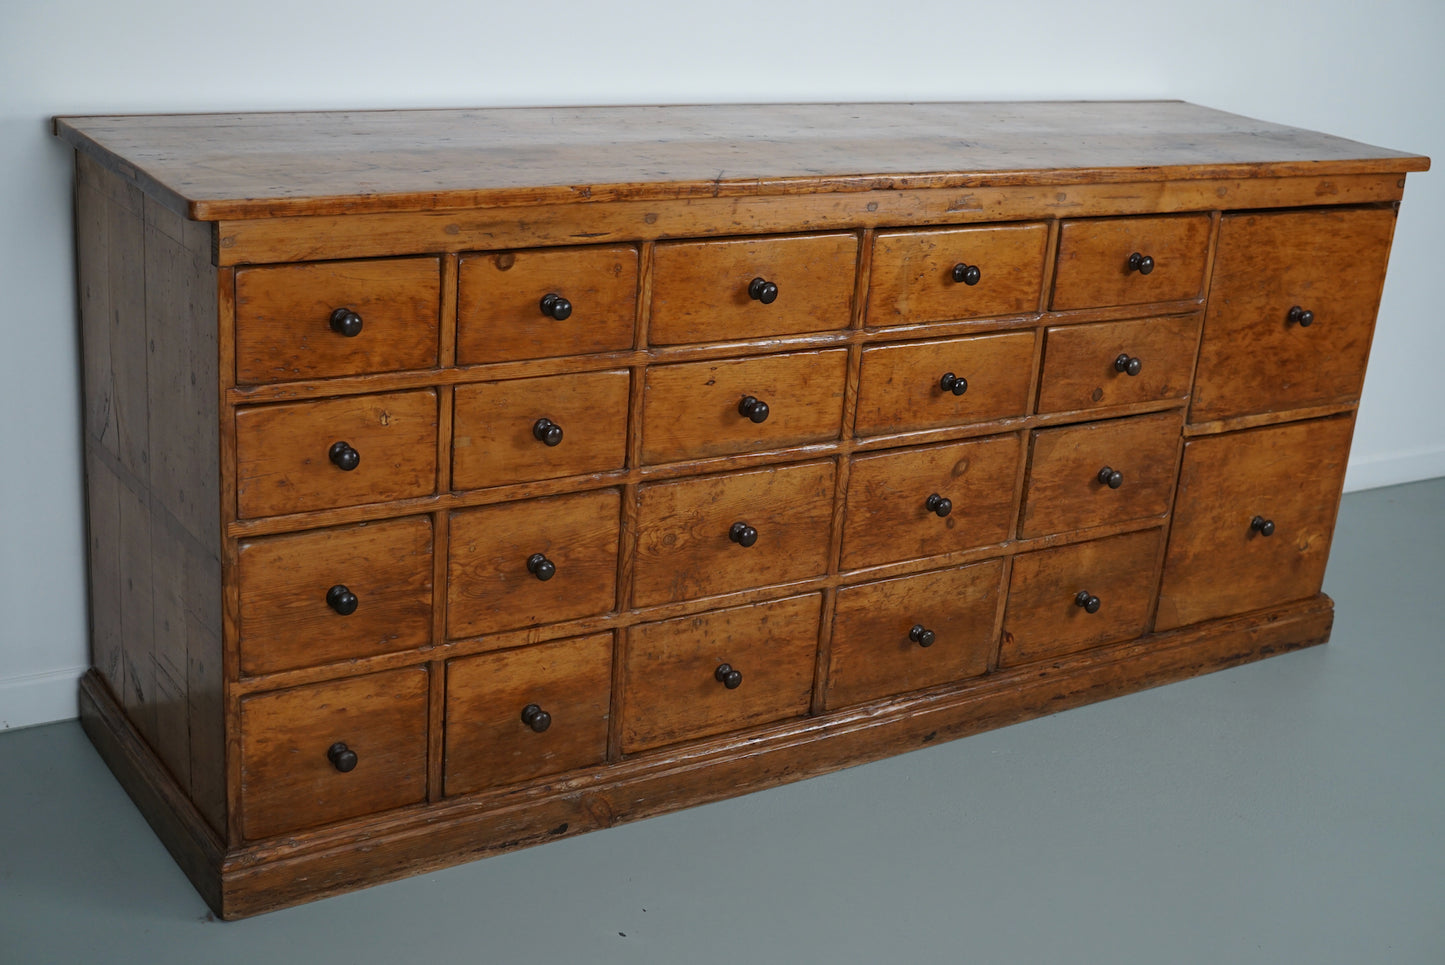 Antique English Pine Apothecary Cabinet / Bank of Drawers, 1890s